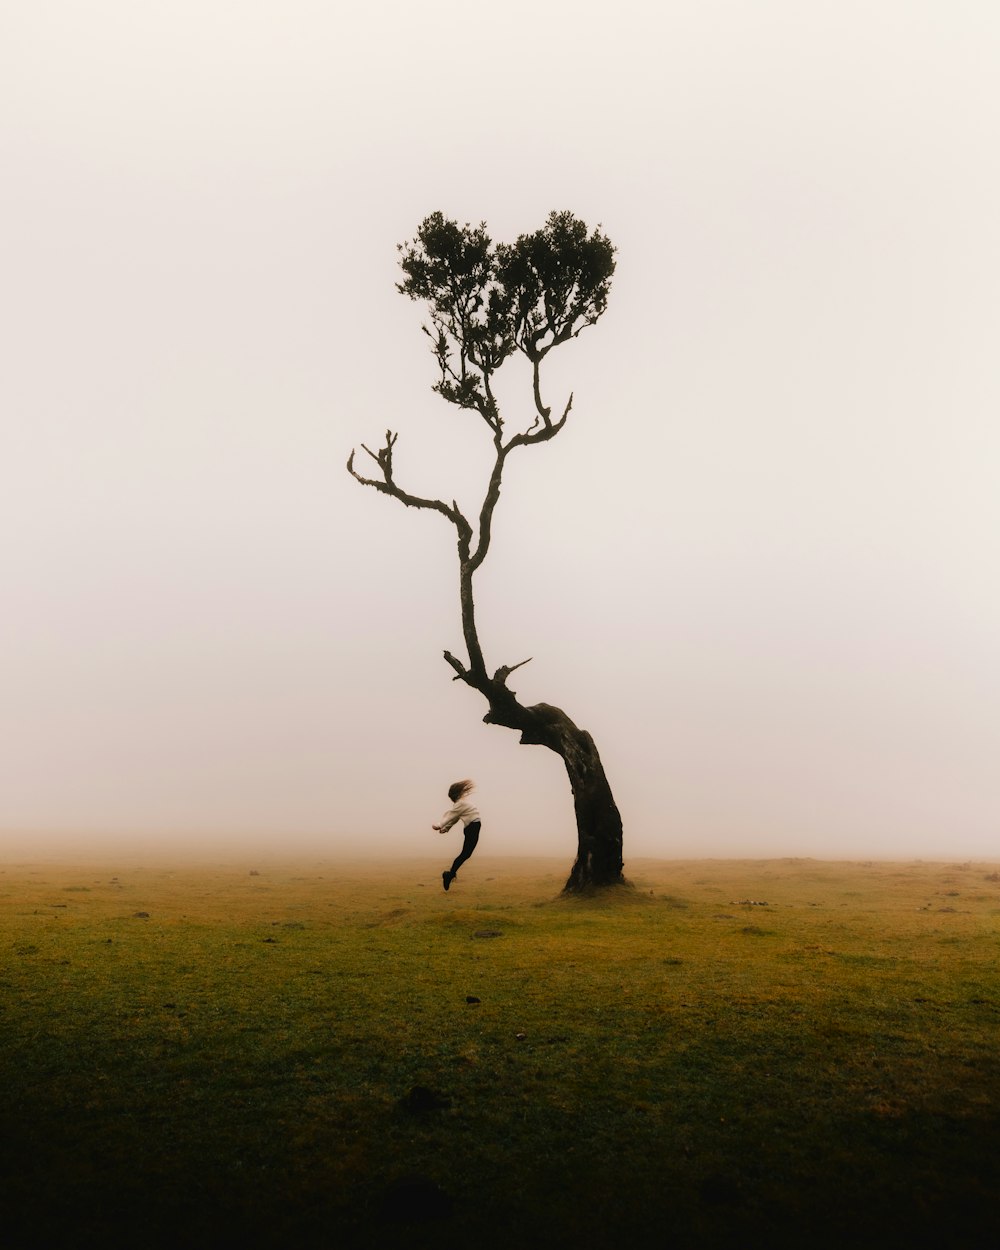 two birds are flying around a tree in a foggy field